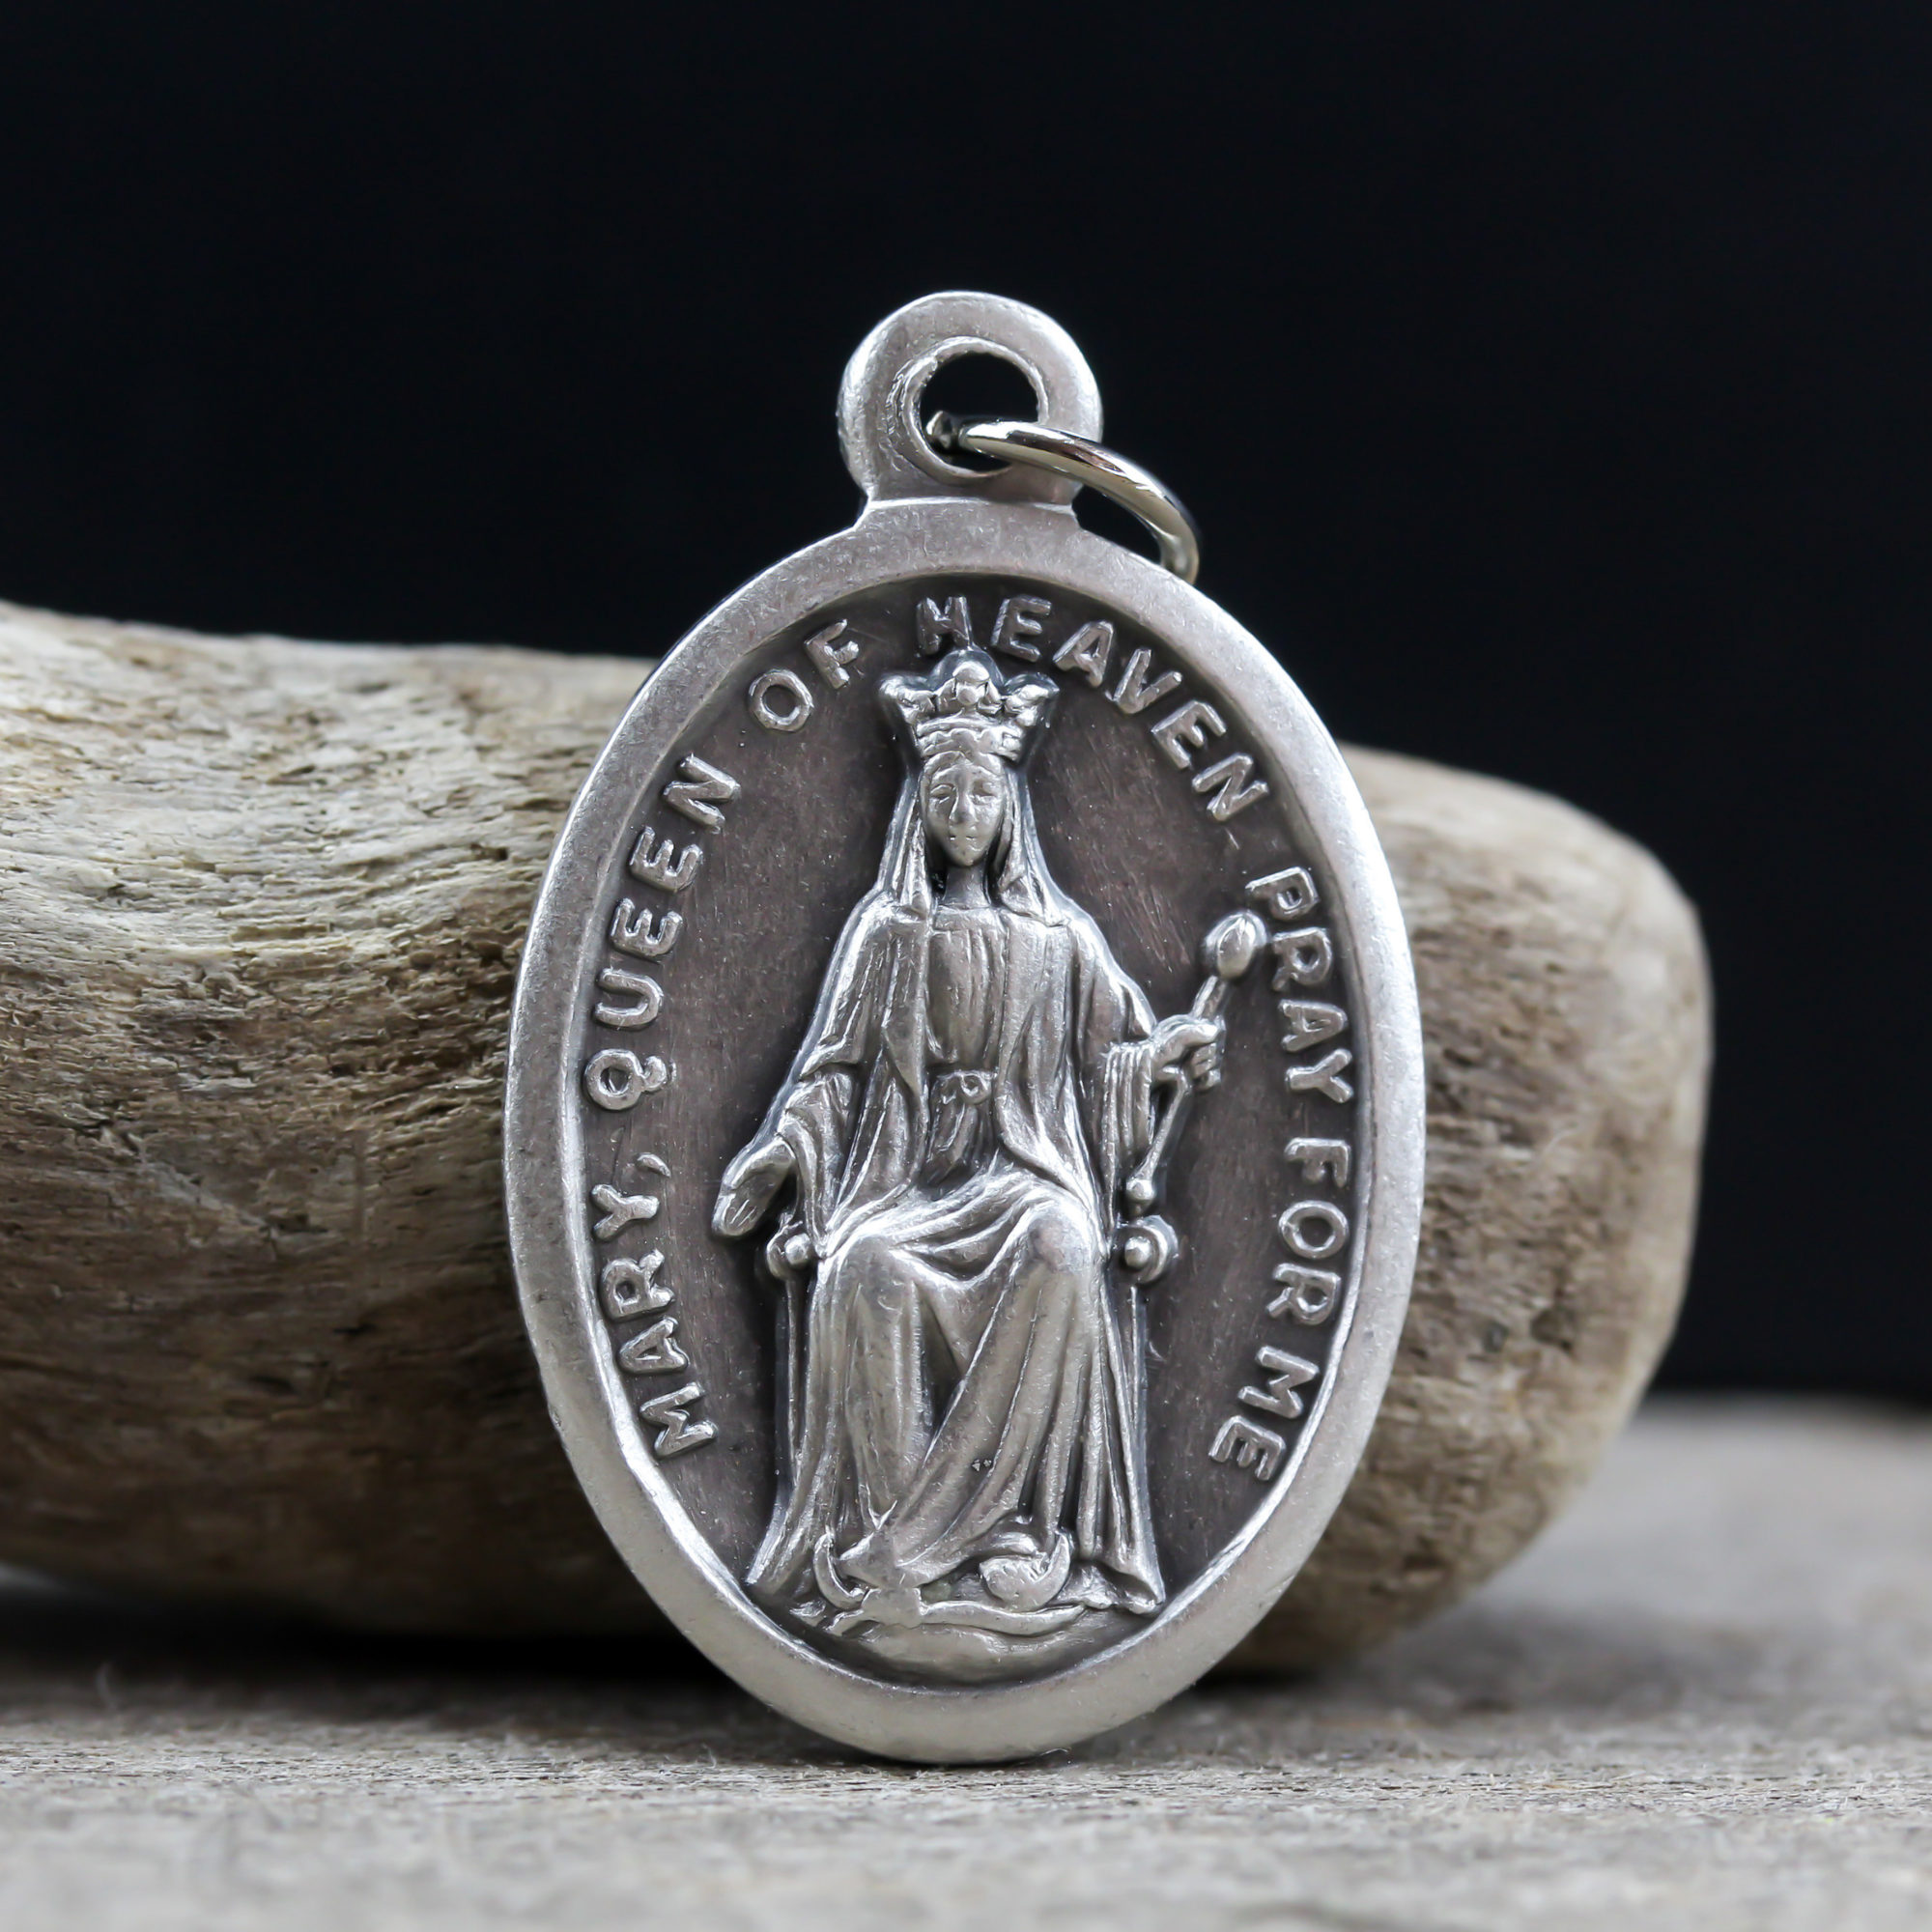 Mary queen of heaven pray for us medal. silver tone color 1" oval medallion made in Italy.